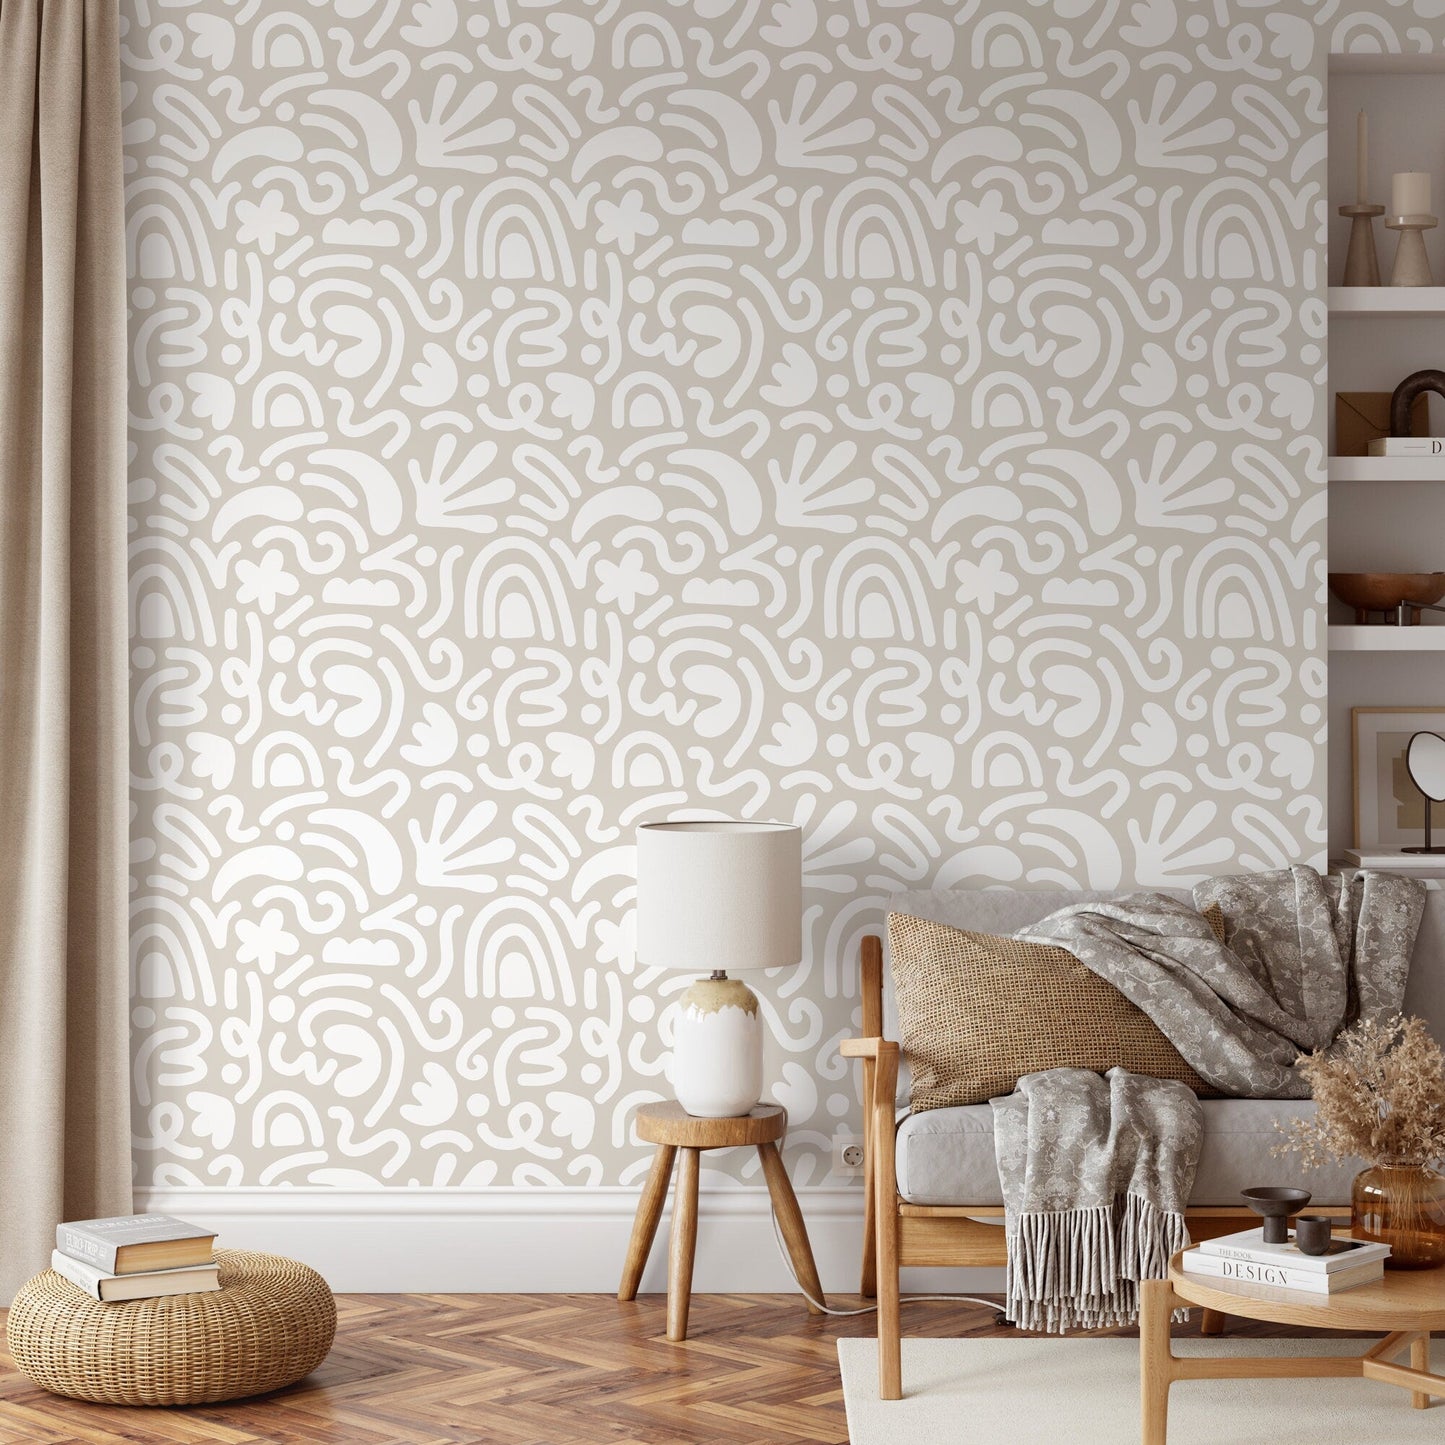 Neutral Matisse Style Wallpaper / Peel and Stick Wallpaper Removable Wallpaper Home Decor Wall Art Wall Decor Room Decor - D191